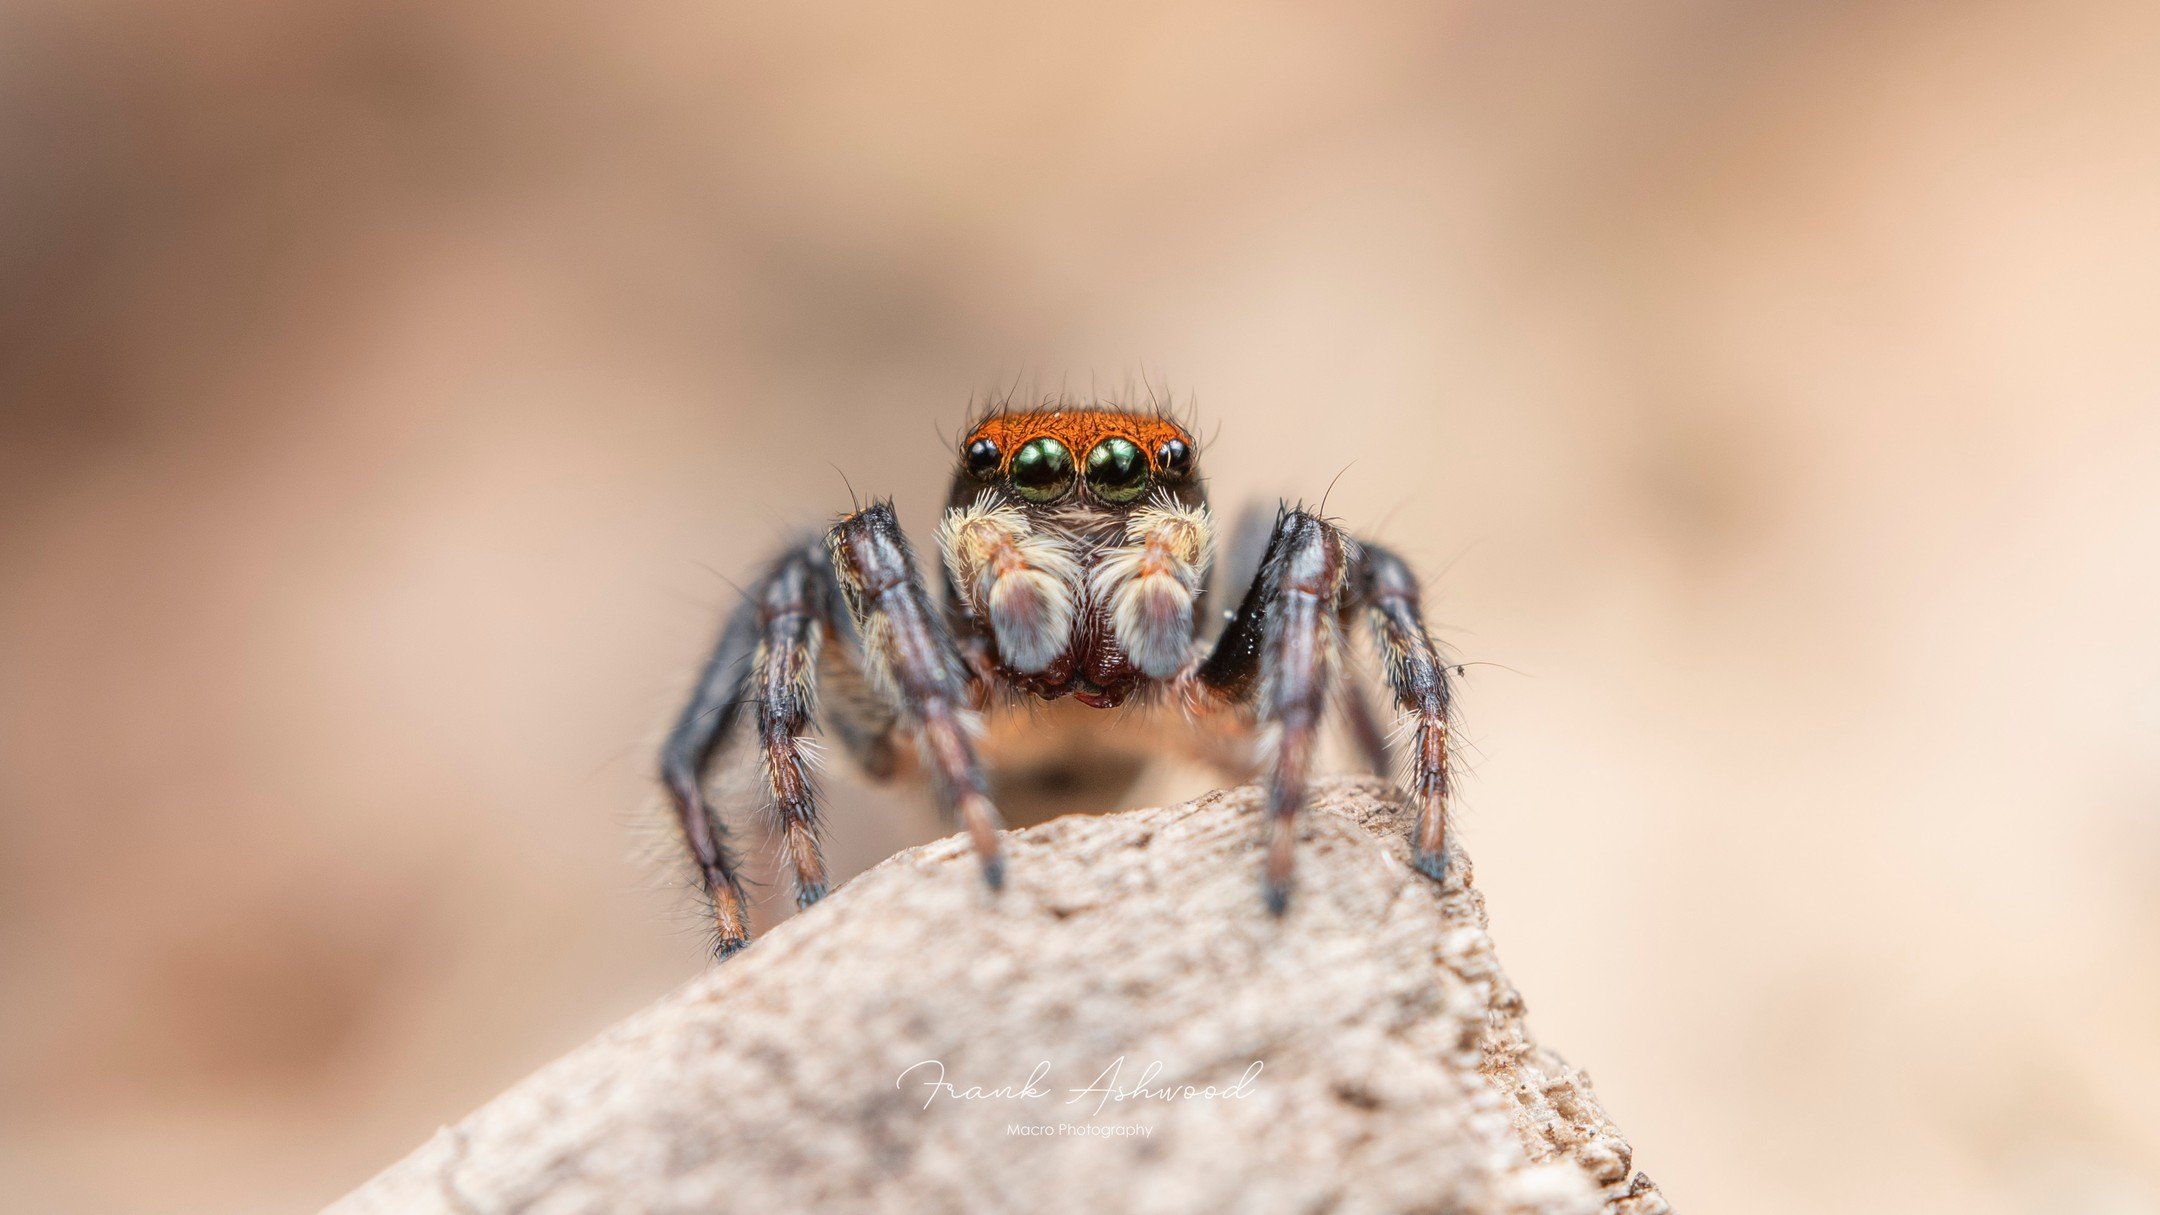 My favourite personal observation so far in the #CityNatureChallenge is this White Banded House Jumper (Maratus griseus) from University of Canterbury campus yesterday.

I didn't know that New Zealand has an introduced species of Peacock spider! Gorg